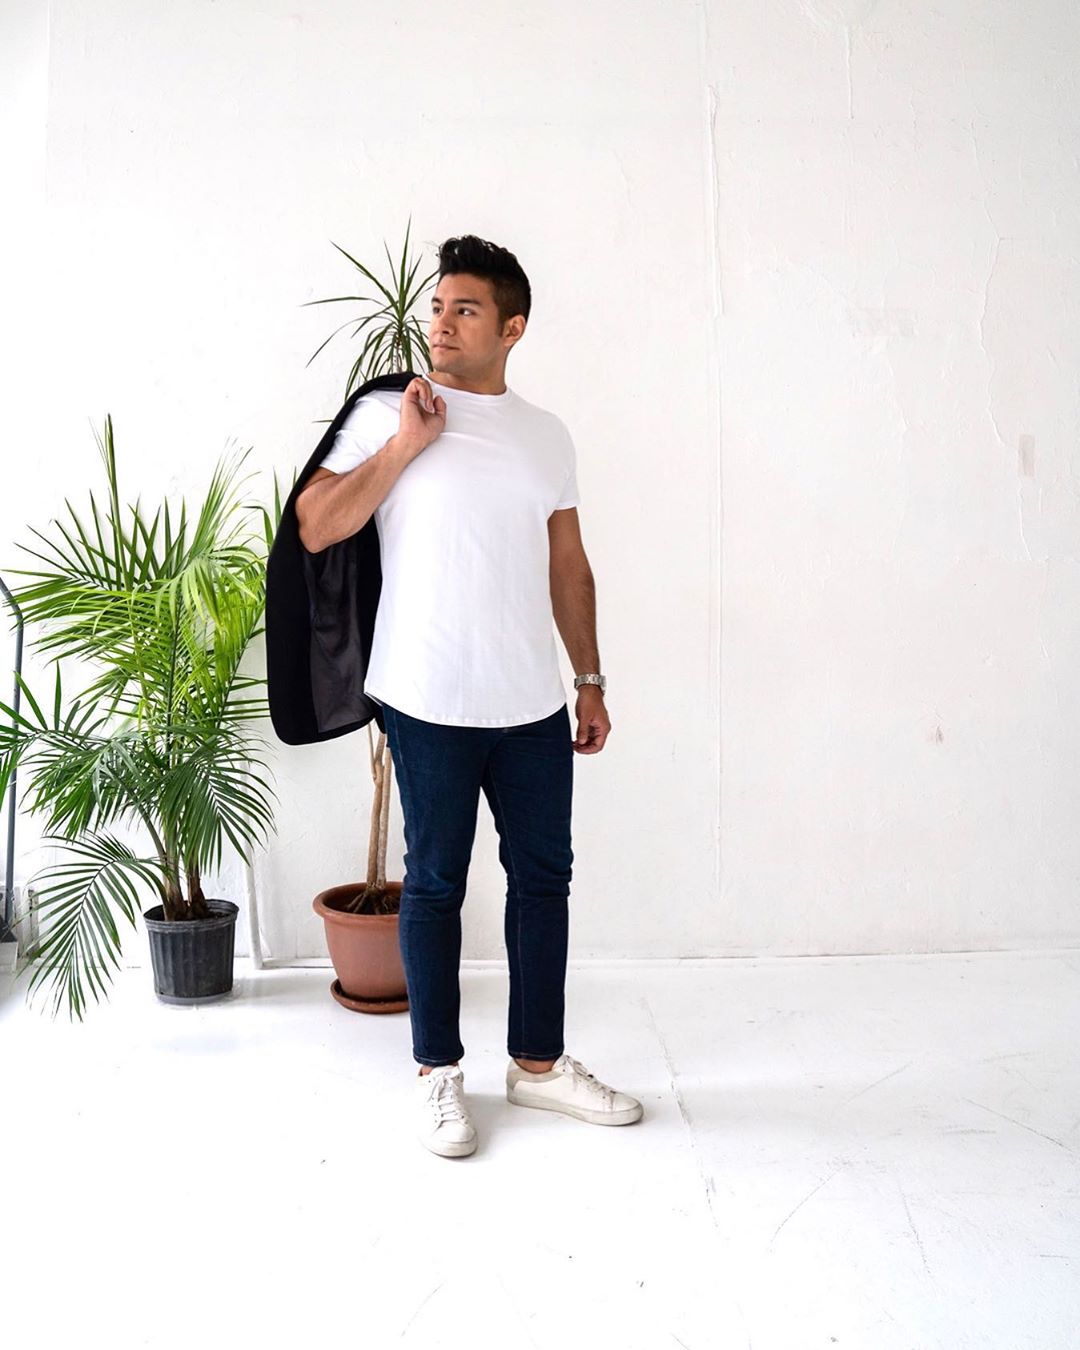 BASICS by hill Classic T-Shirt with Drop Hem - white t shirt style - dandy in the bronx